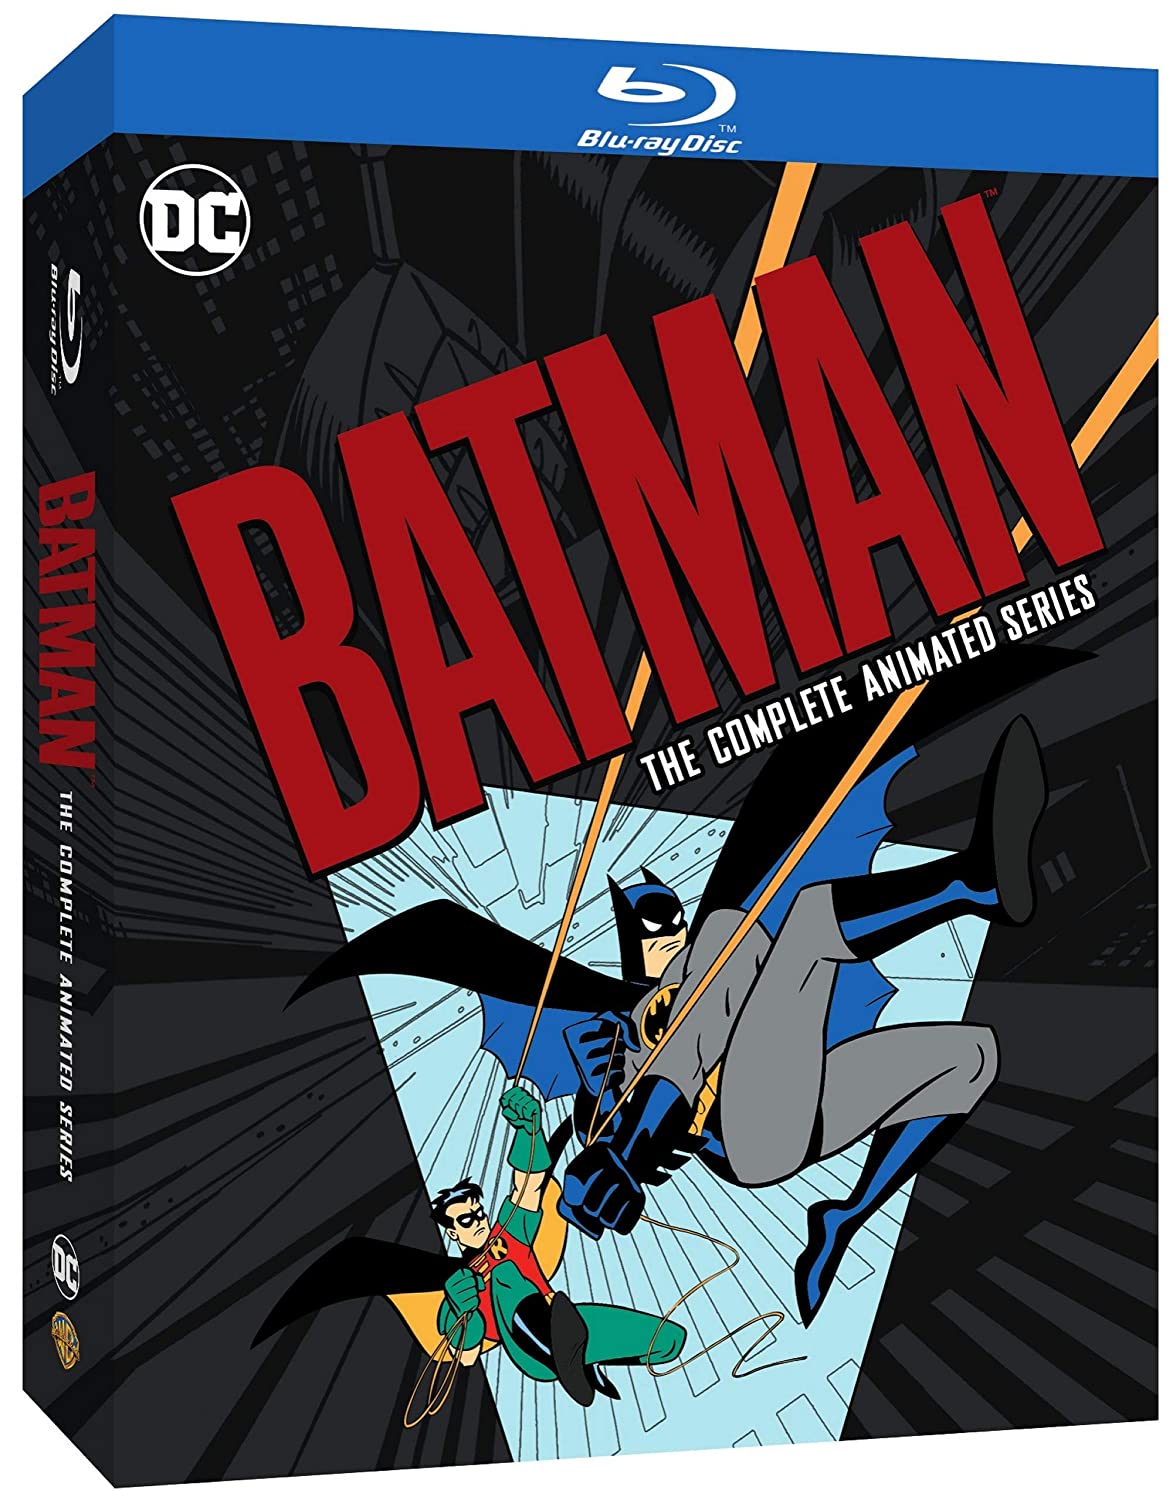 Batman or Superman: The Complete Animated Series (Blu-Ray) $29.99 Each + Free Shipping via Amazon